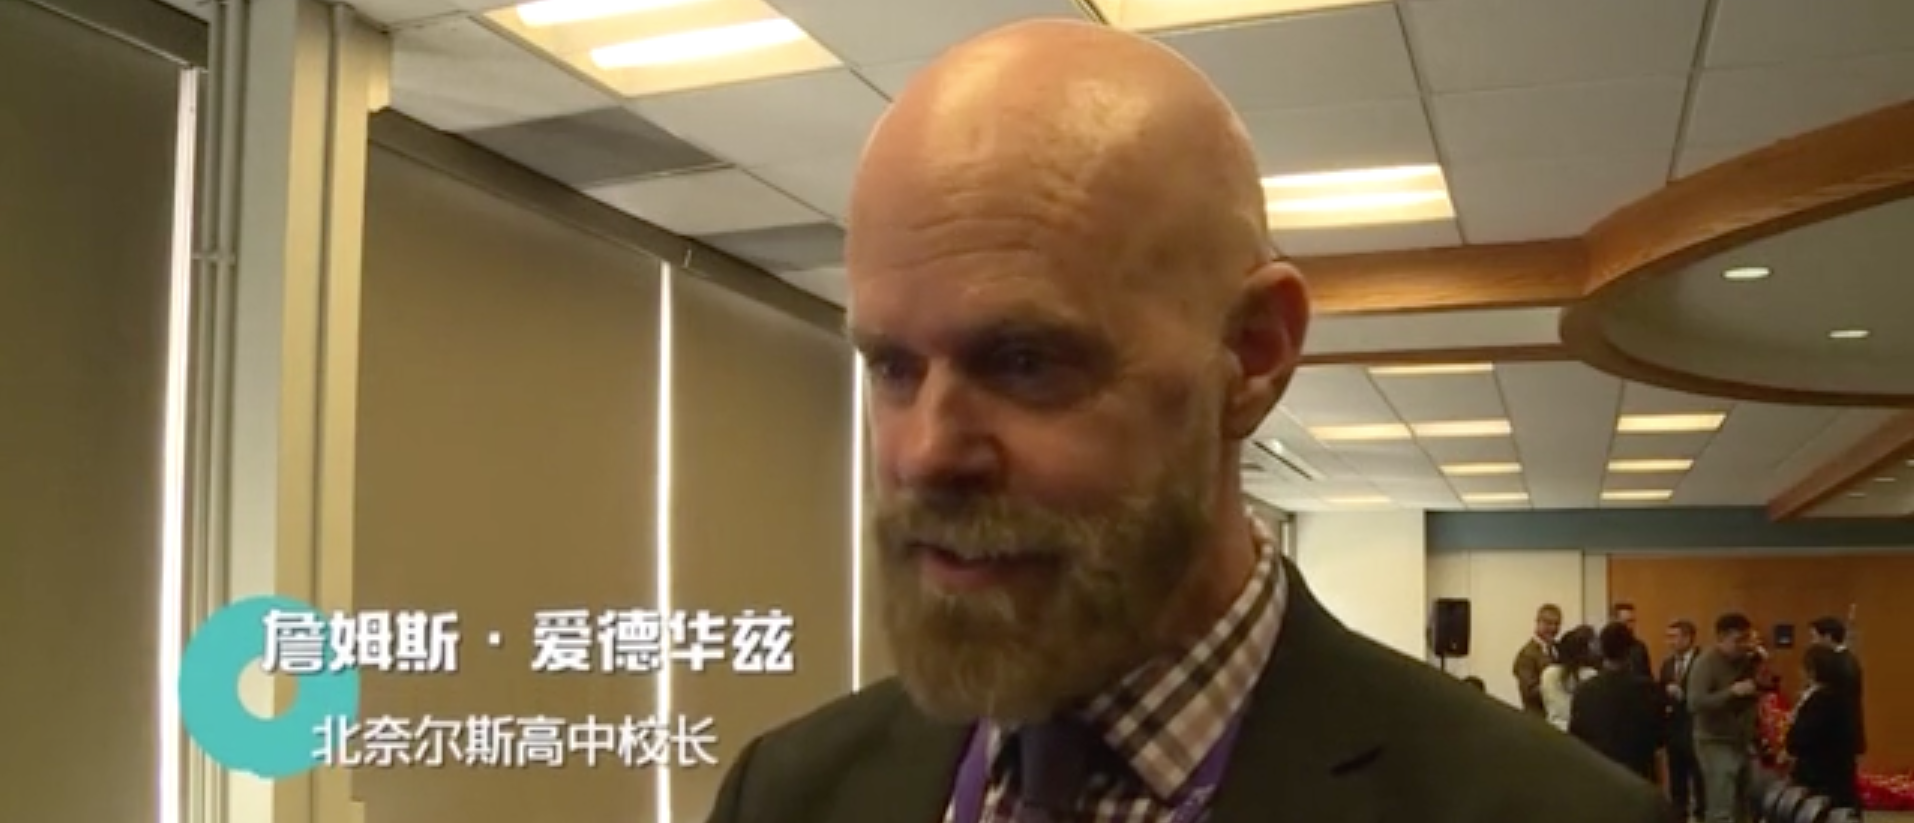 Niles North High School Principal James Edwards said he was very proud of students for writing the letters to General Secretary Xi Jinping. [Screenshot/GlobalTimes]